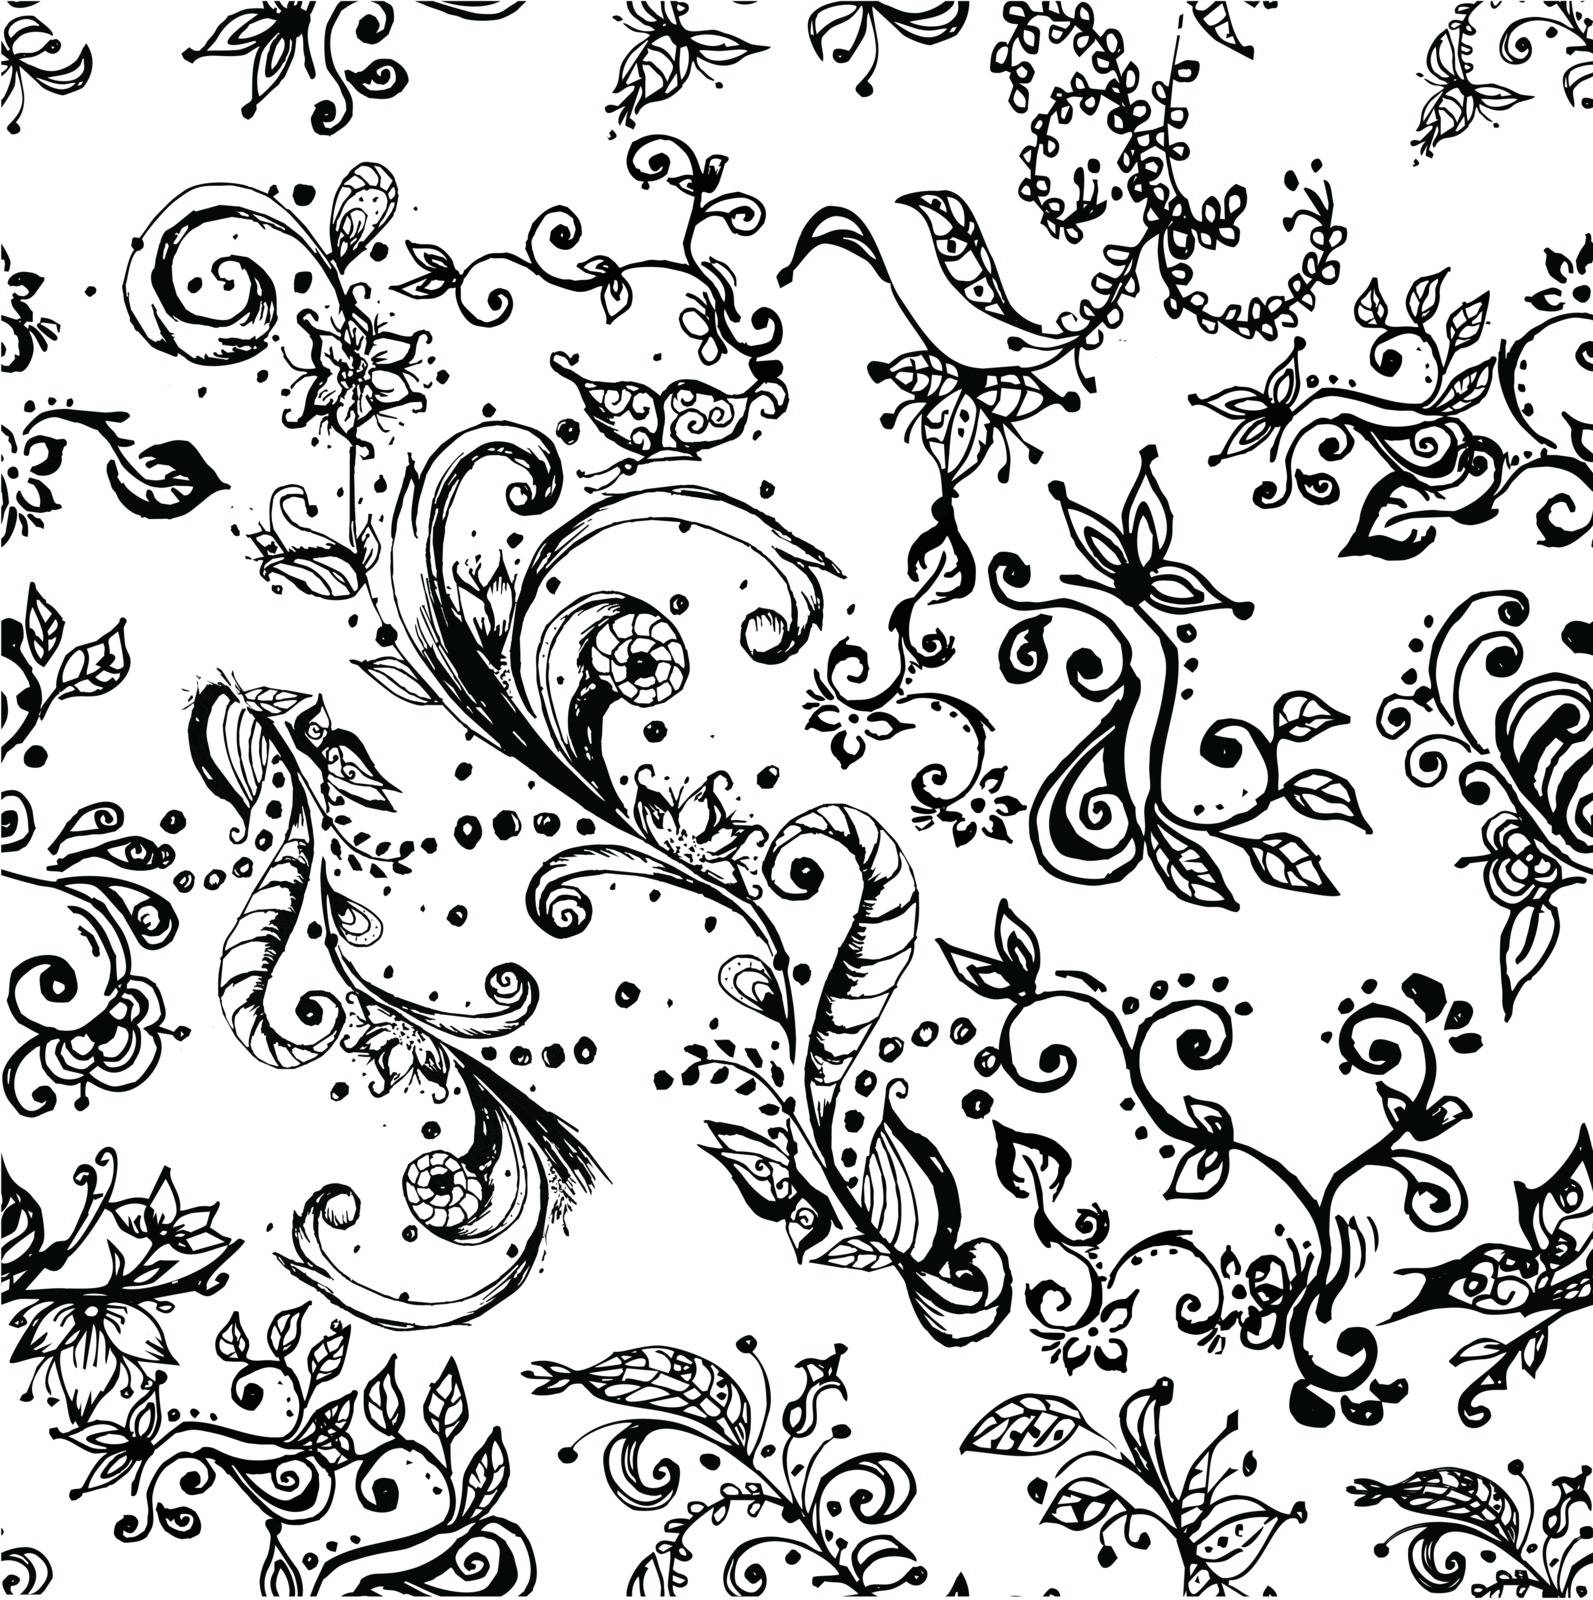 Seamless floral pattern by robin2